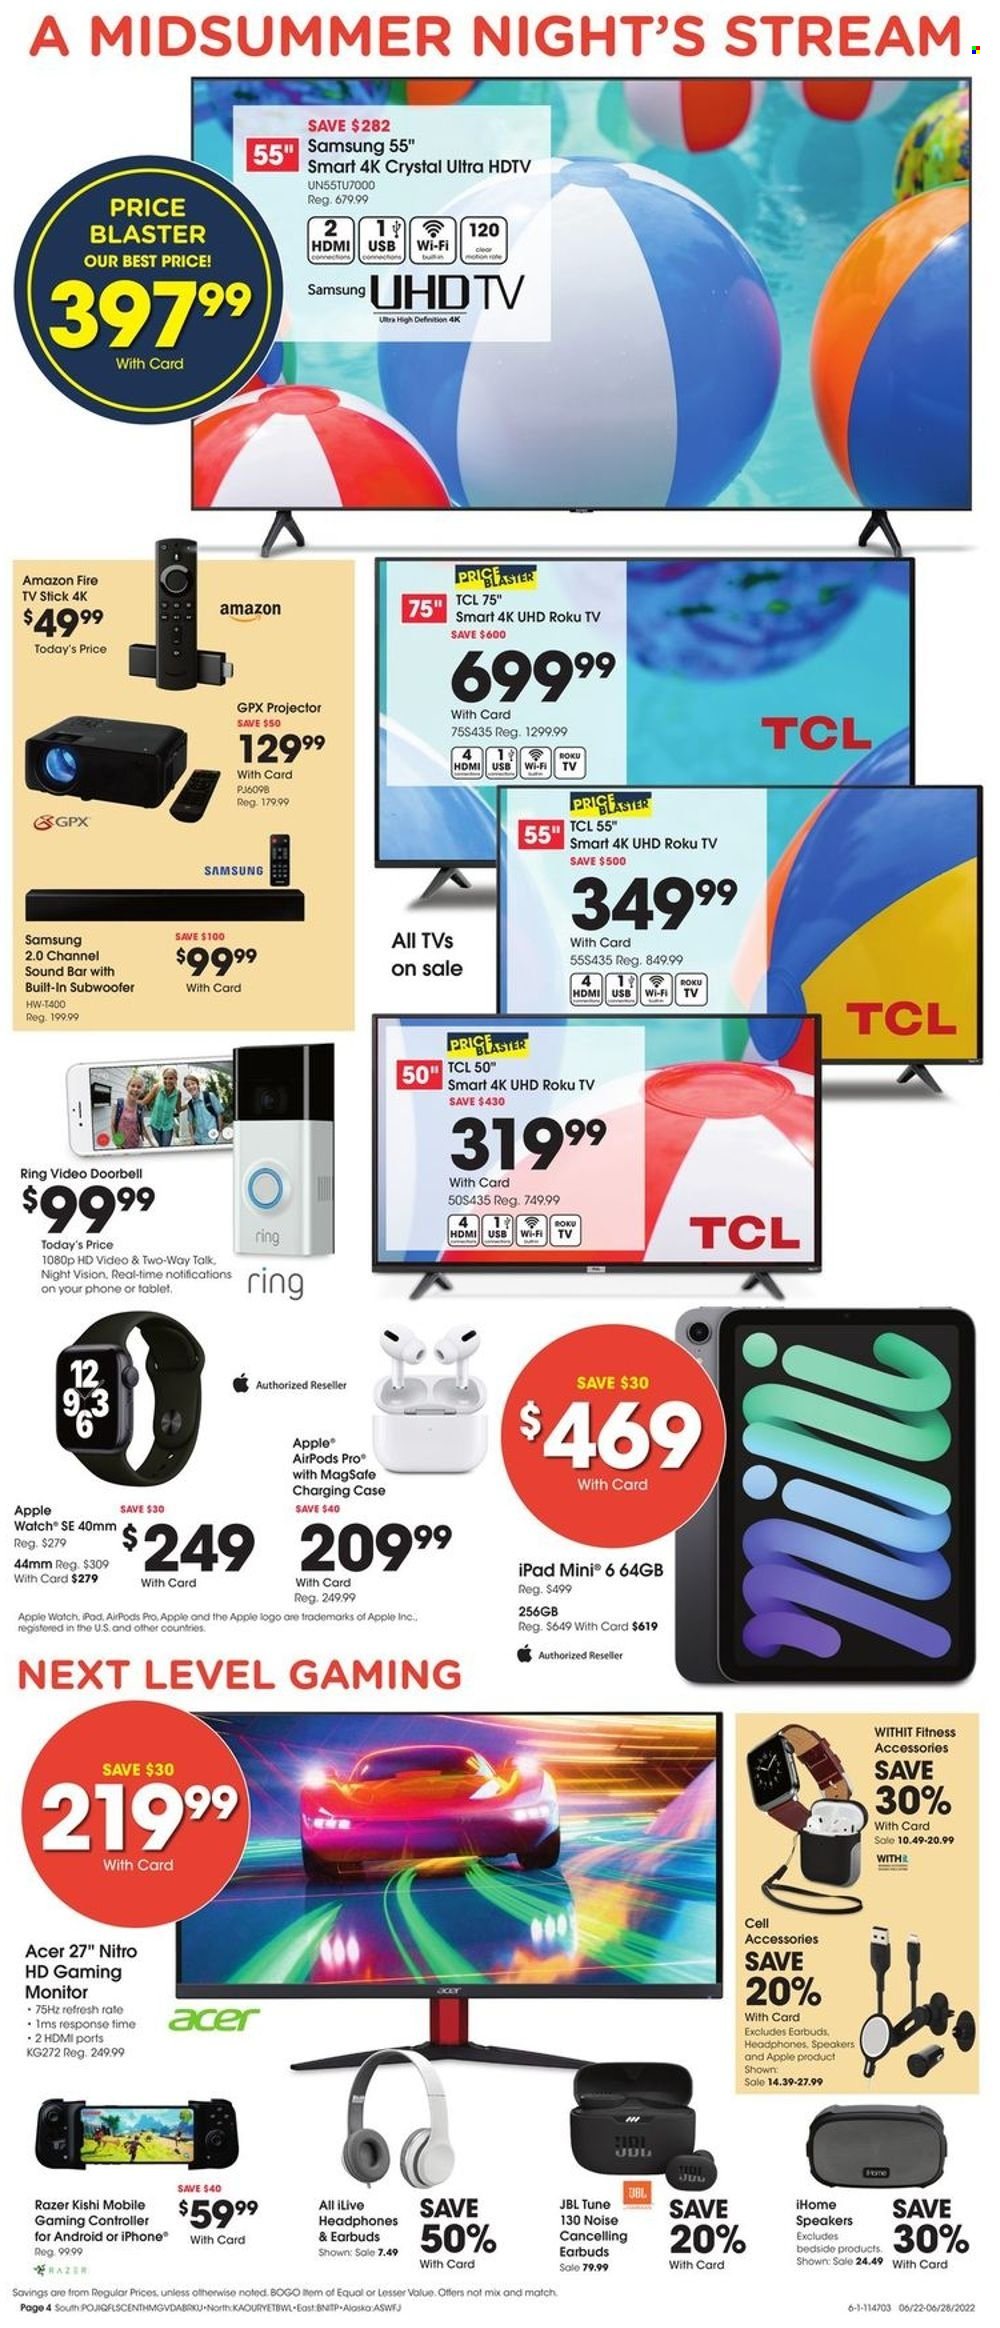 Fred Meyer ad  - 06.22.2022 - 06.28.2022.